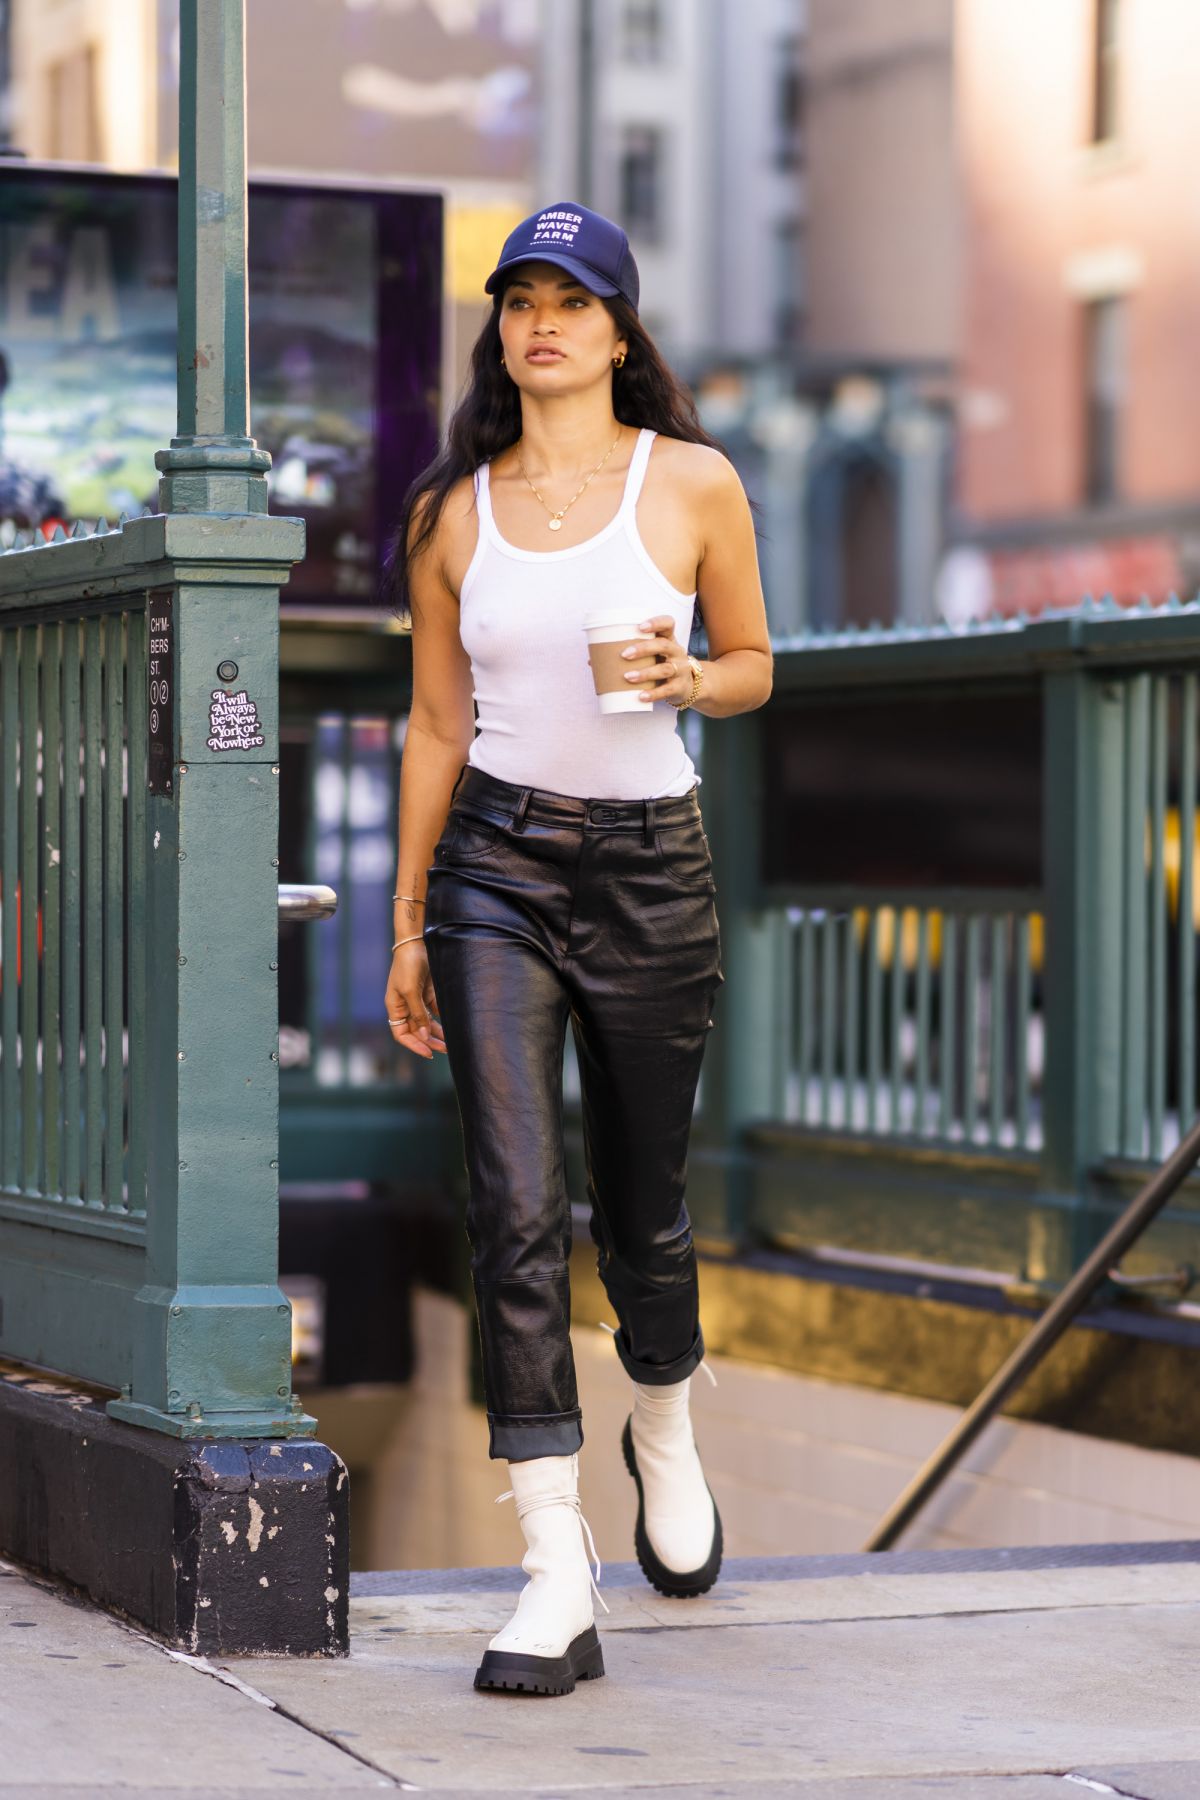 SHANINA SHAIK Out and About in New York 09/29/2021 – HawtCelebs